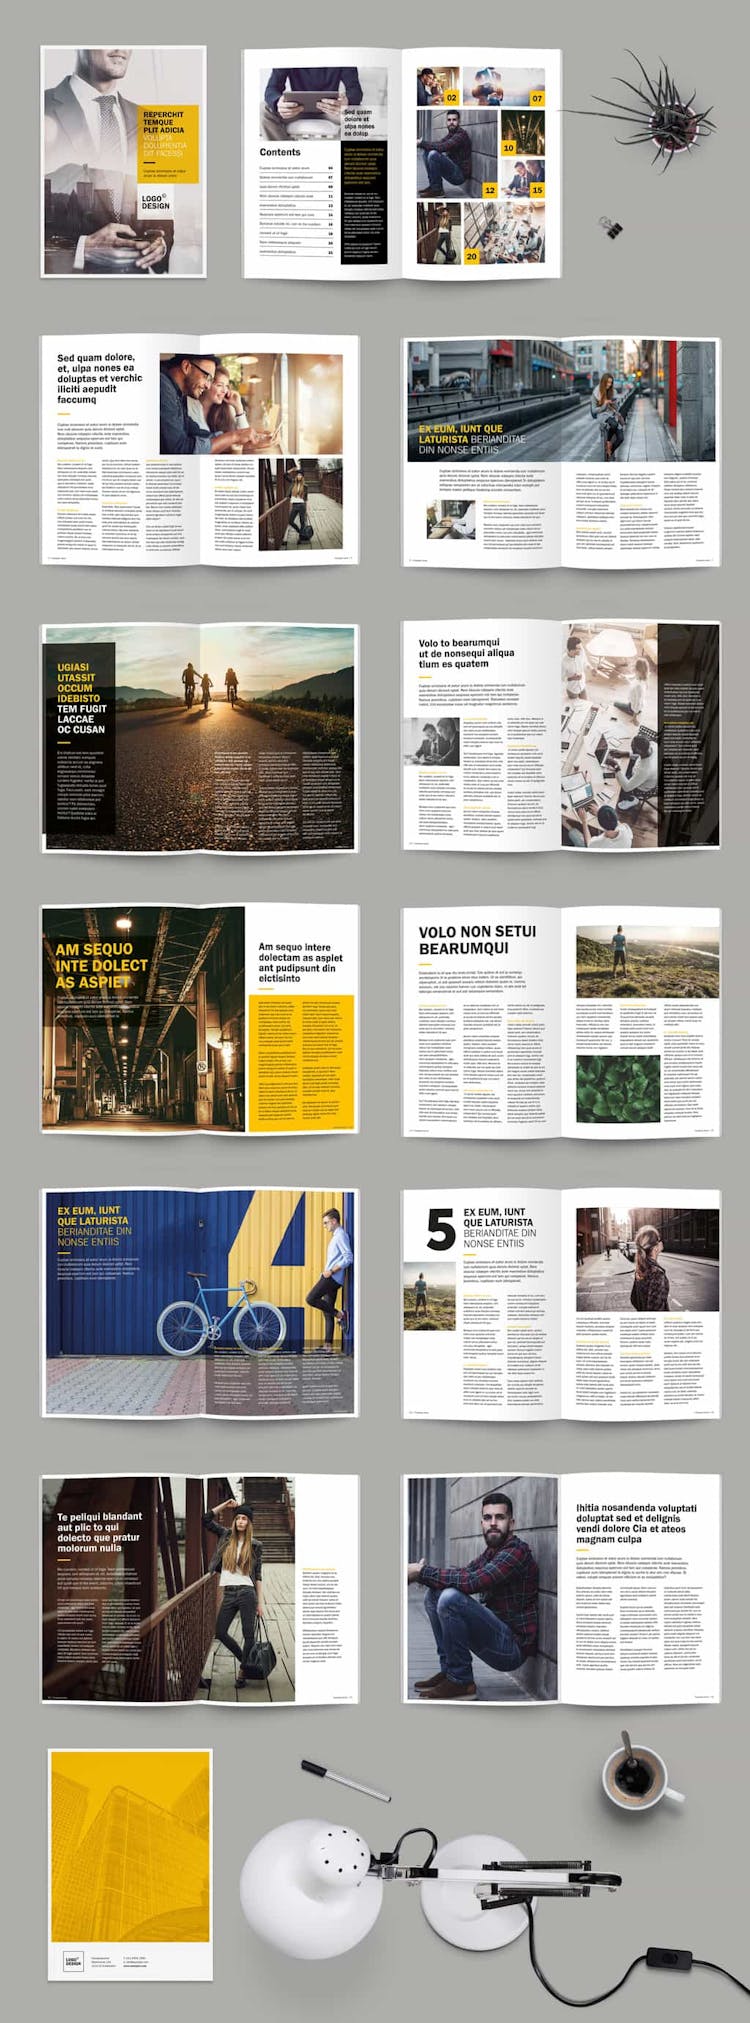 Magazine Layout Template Indesign from redokun.imgix.net